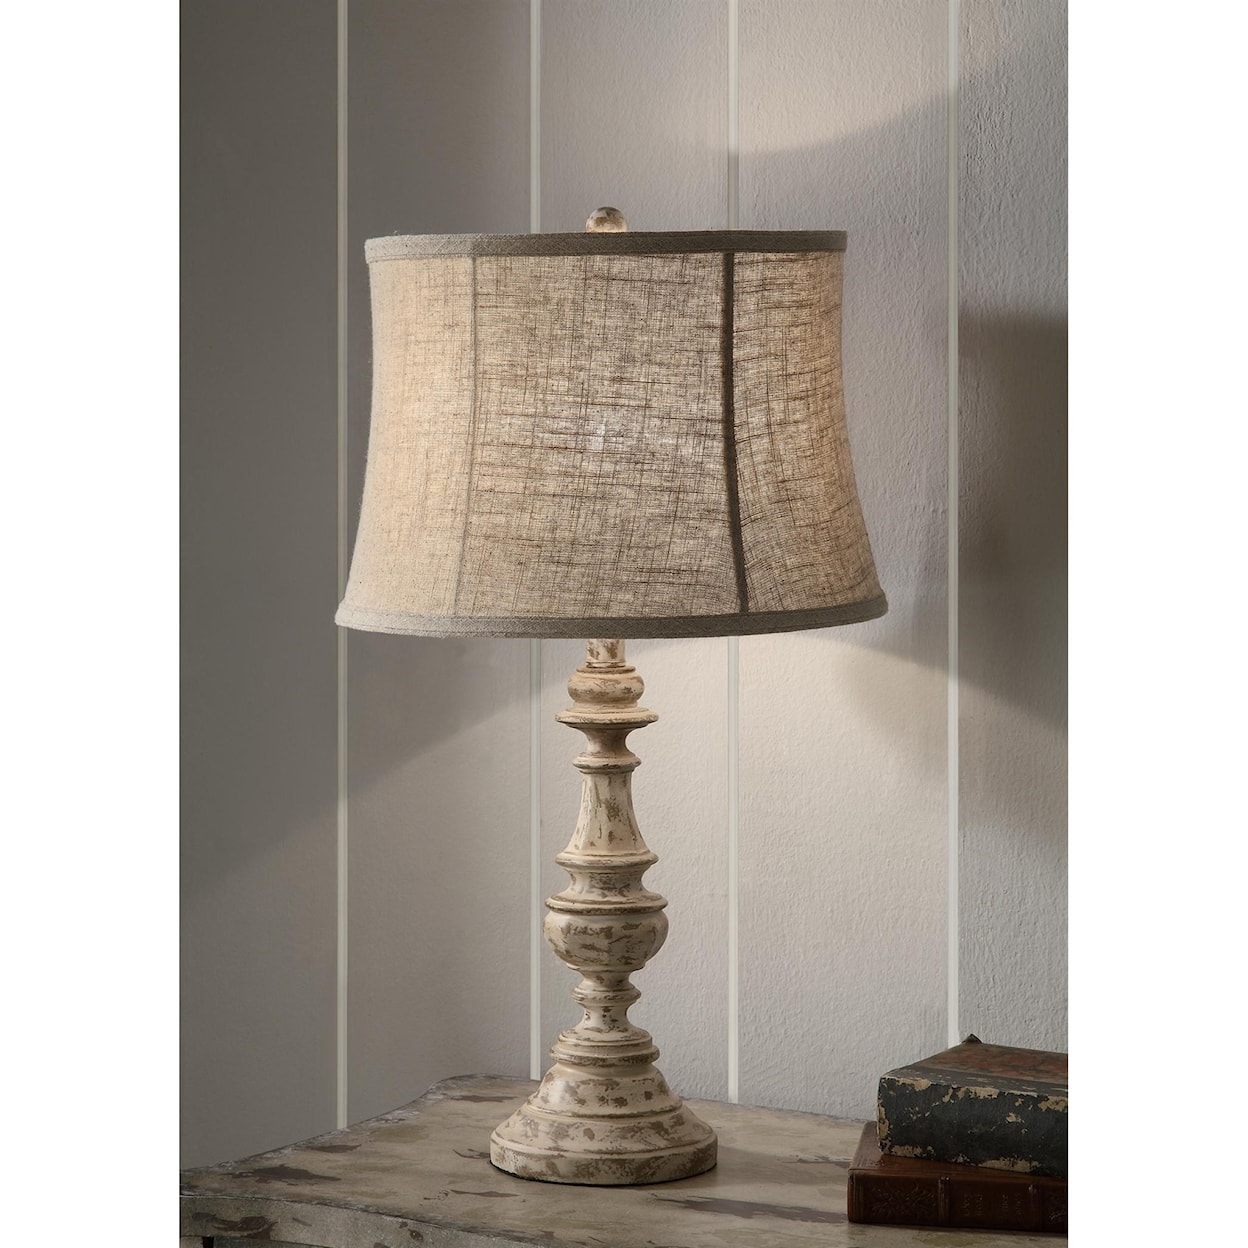 Crestview Collection Lighting Cunningham Table Lamp 24.5"Ht.